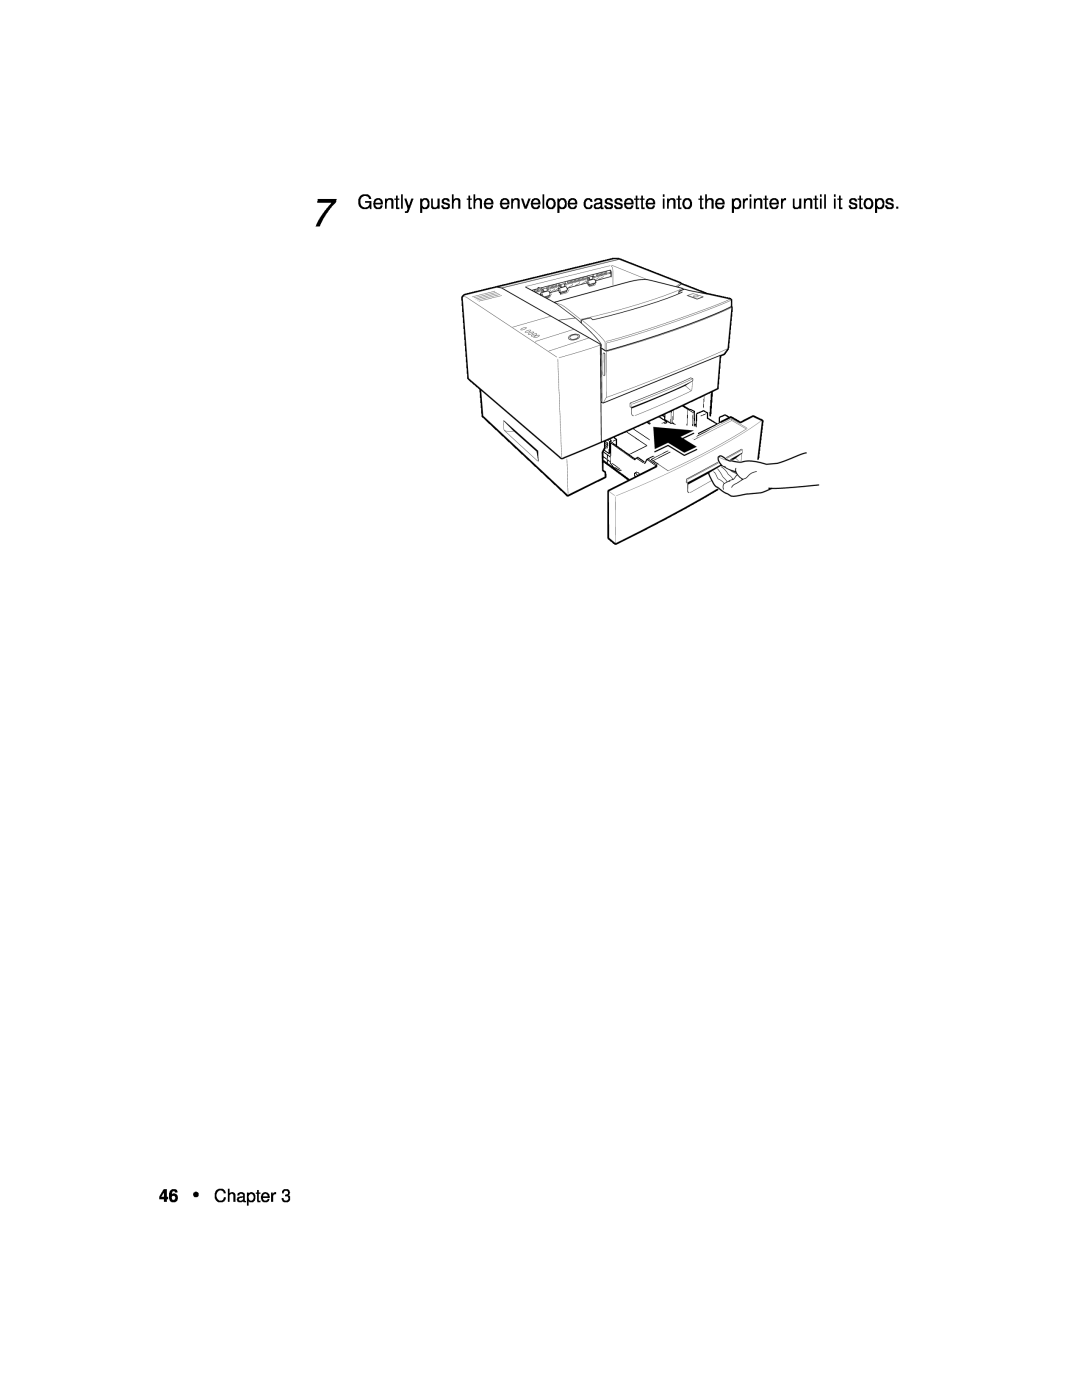 Xerox P12 manual Gently push the envelope cassette into the printer until it stops, Chapter 